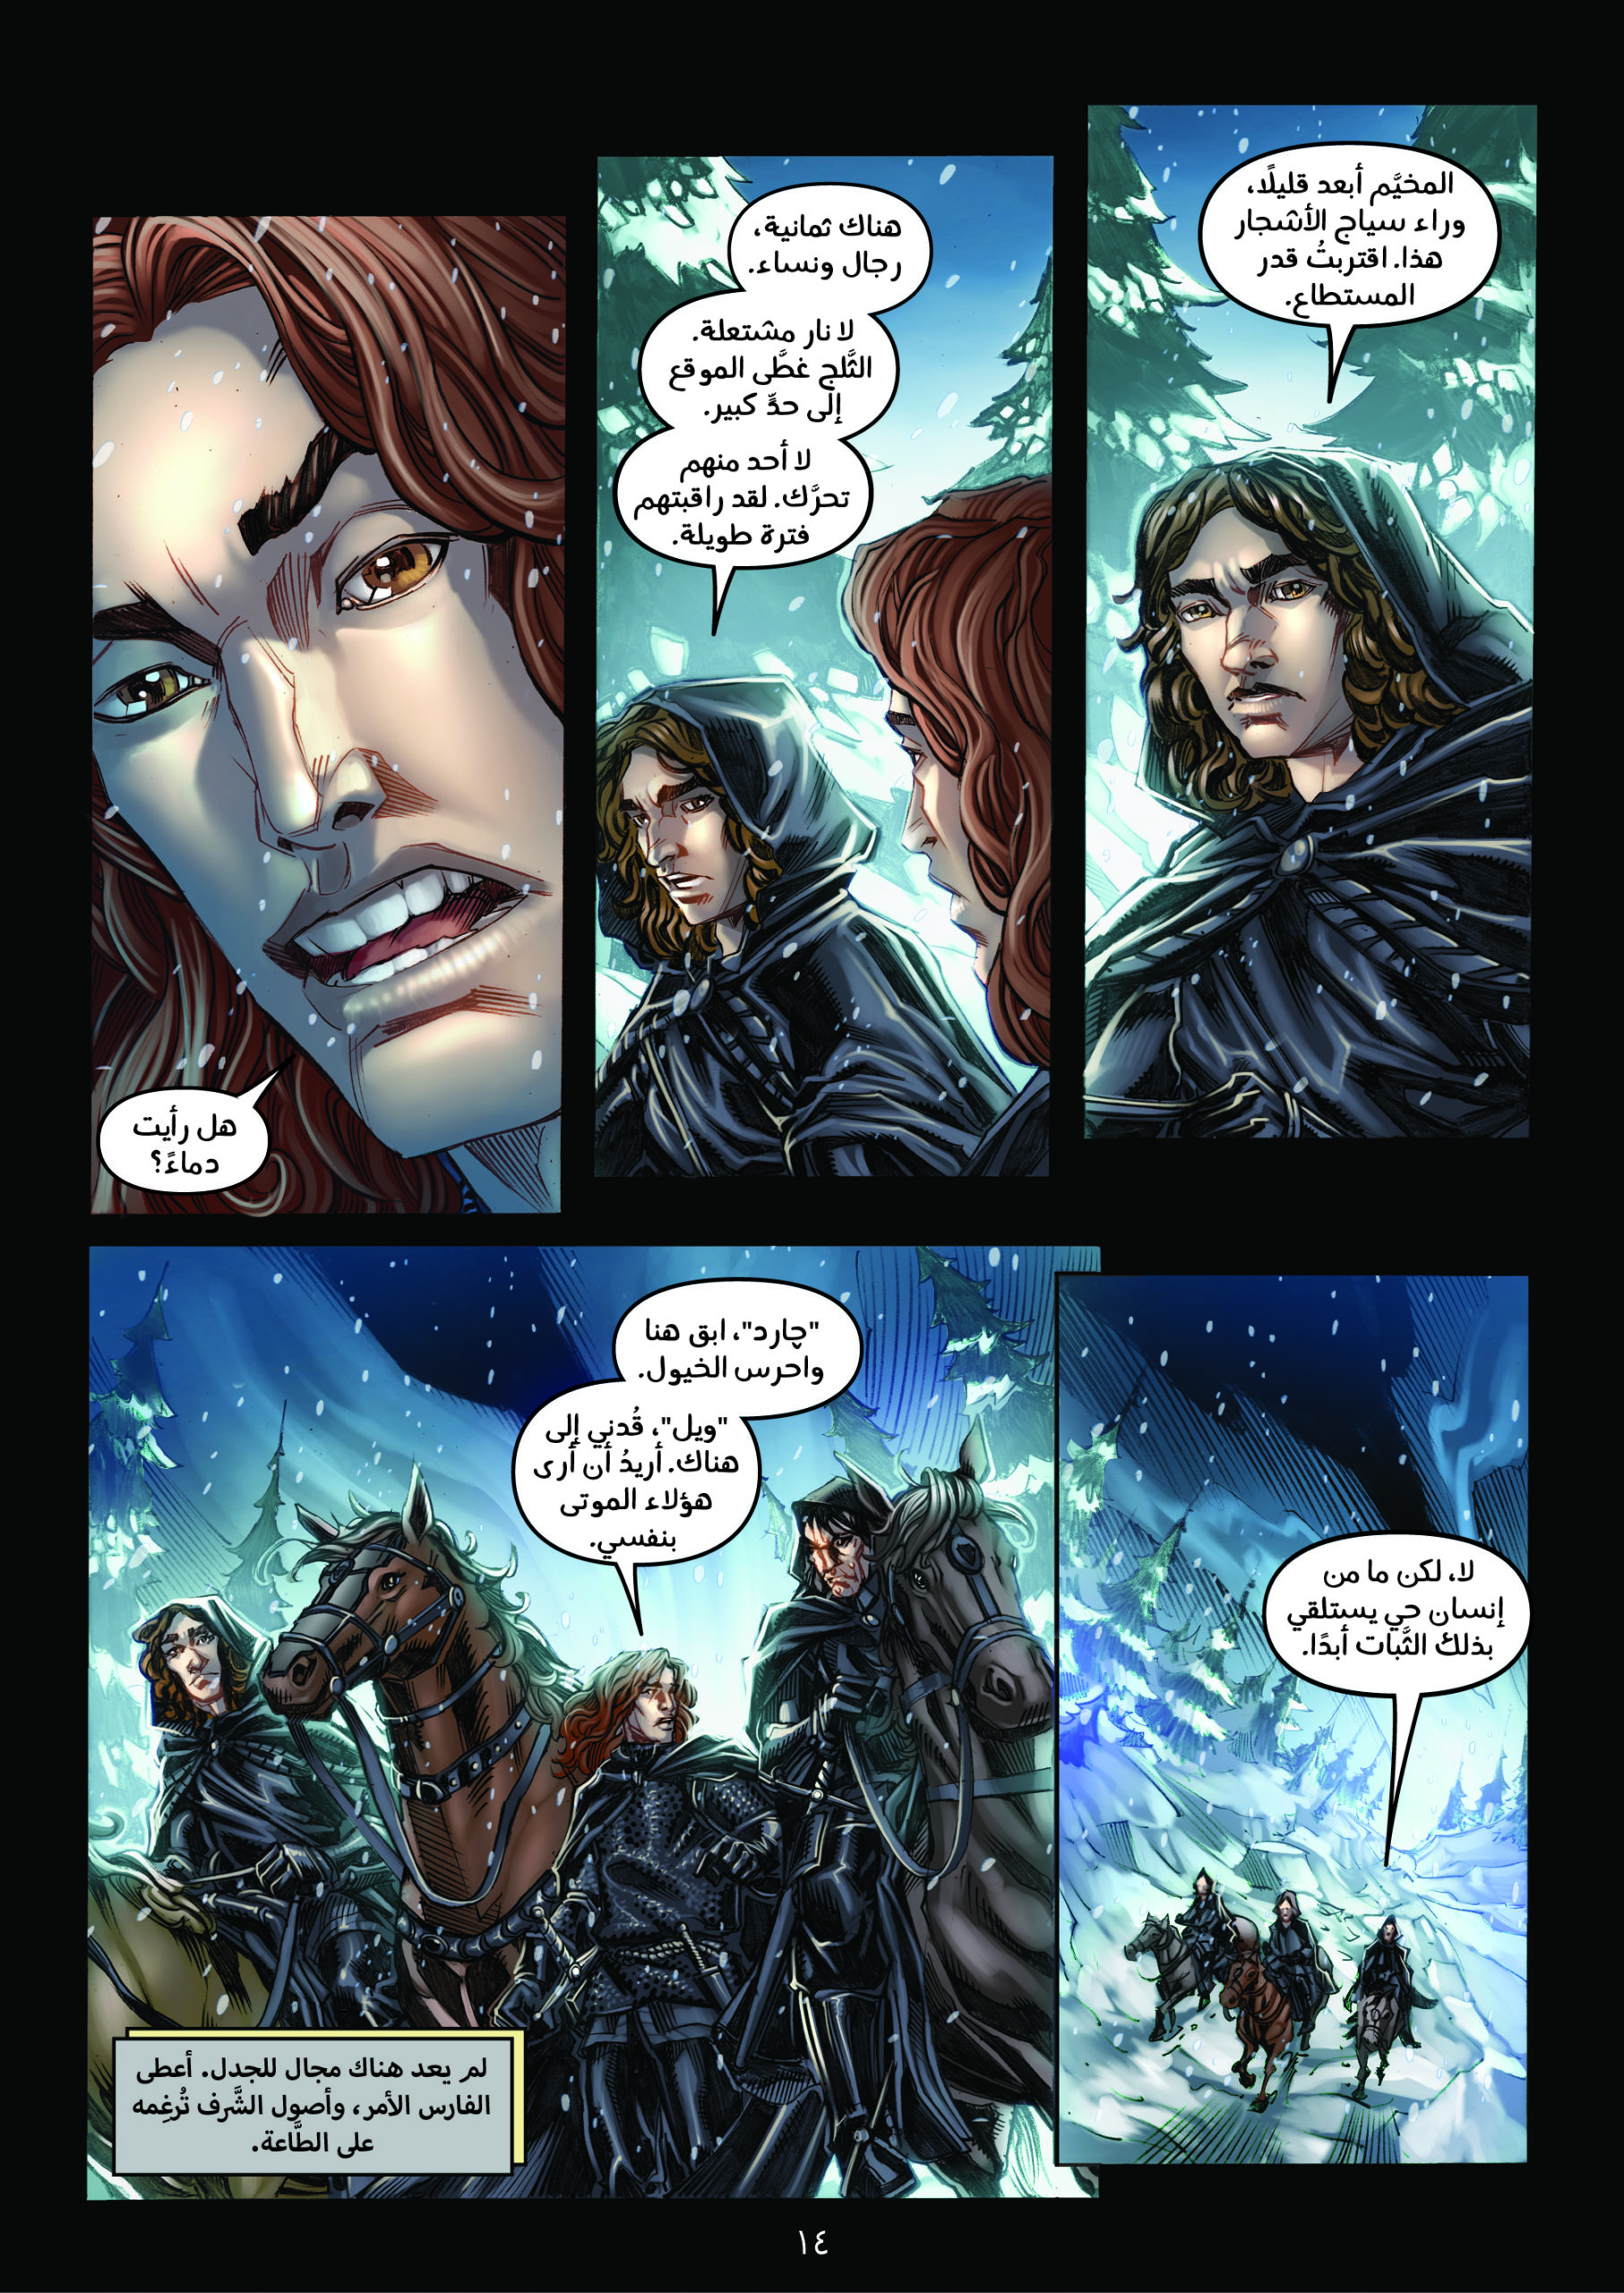 A game of thrones comic book